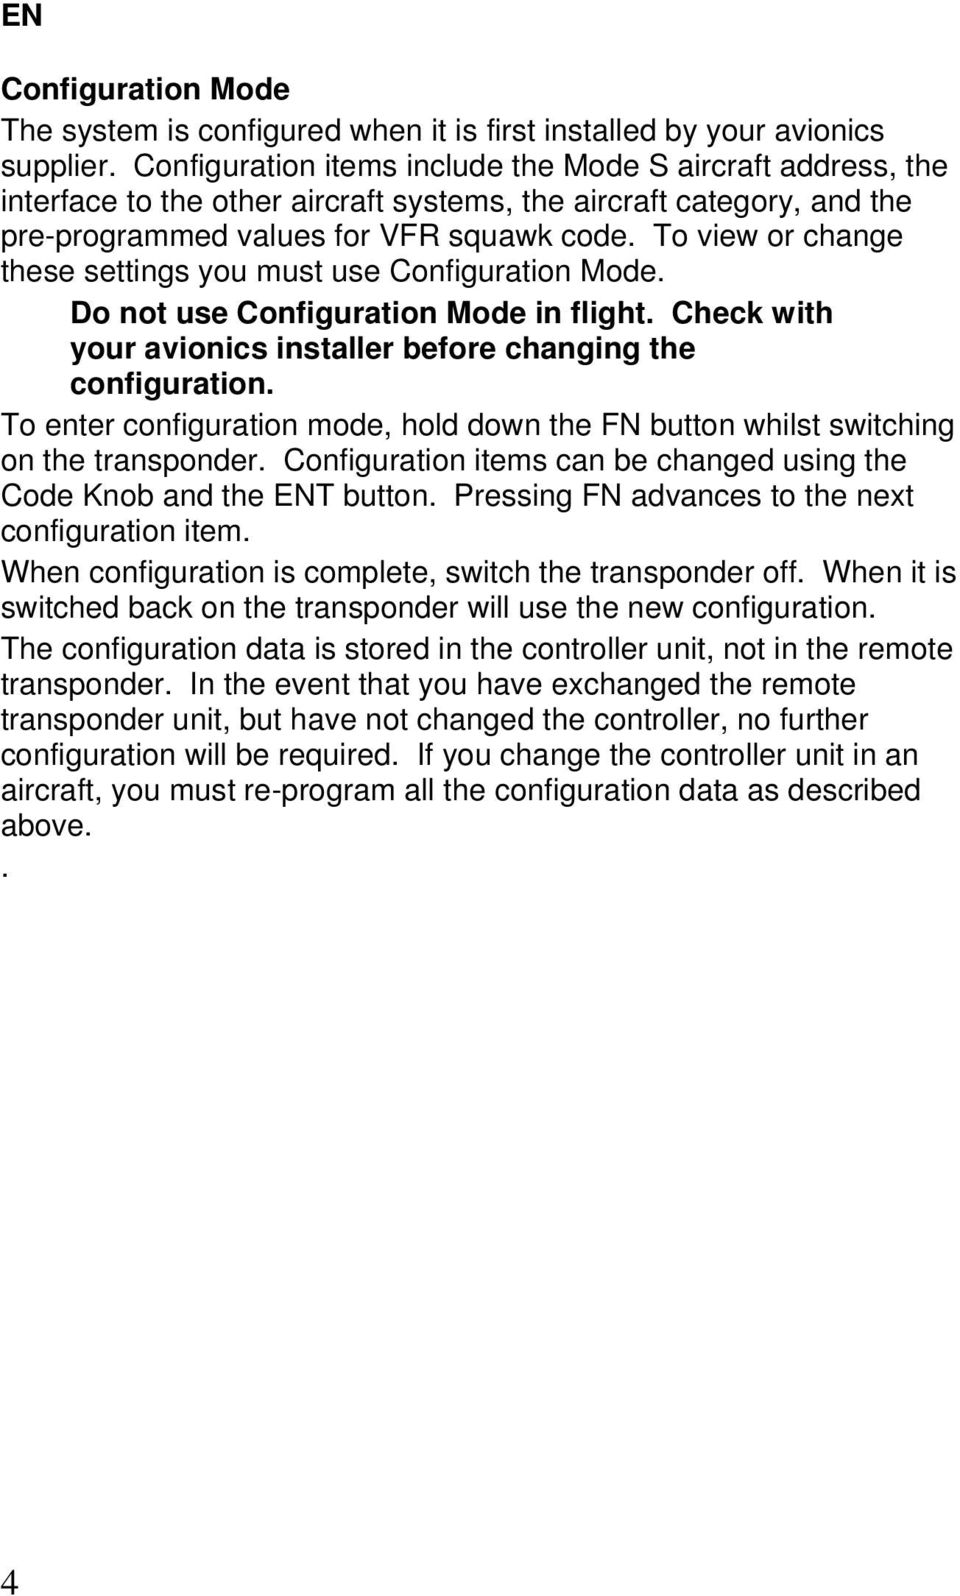 To view or change these settings you must use Configuration Mode. Do not use Configuration Mode in flight. Check with your avionics installer before changing the configuration.